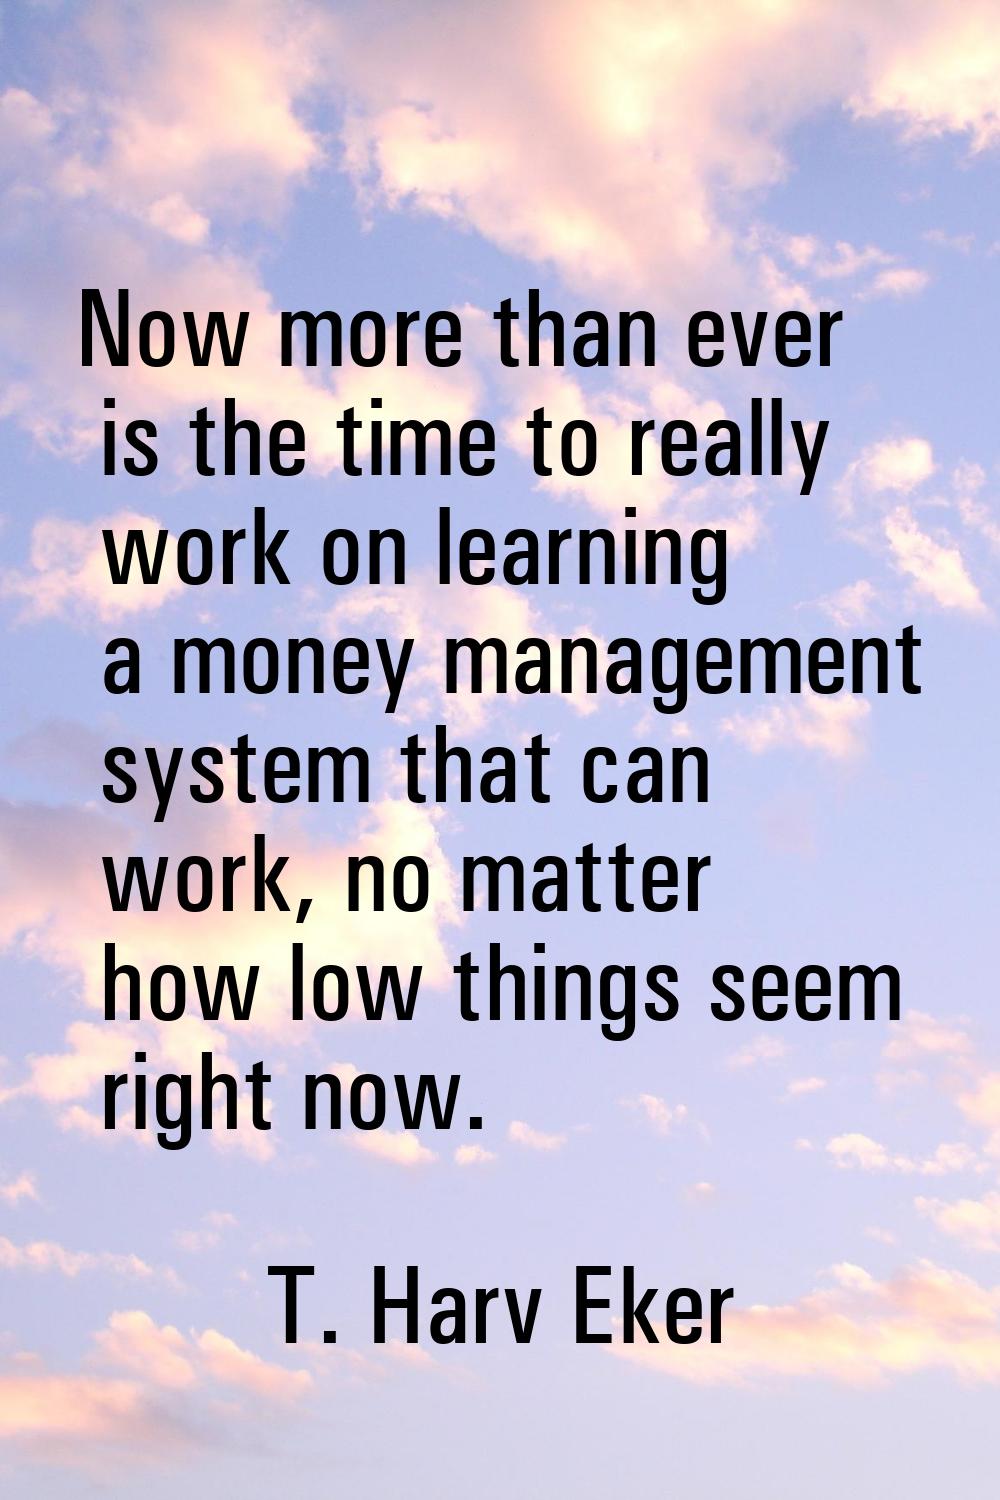 Now more than ever is the time to really work on learning a money management system that can work, 